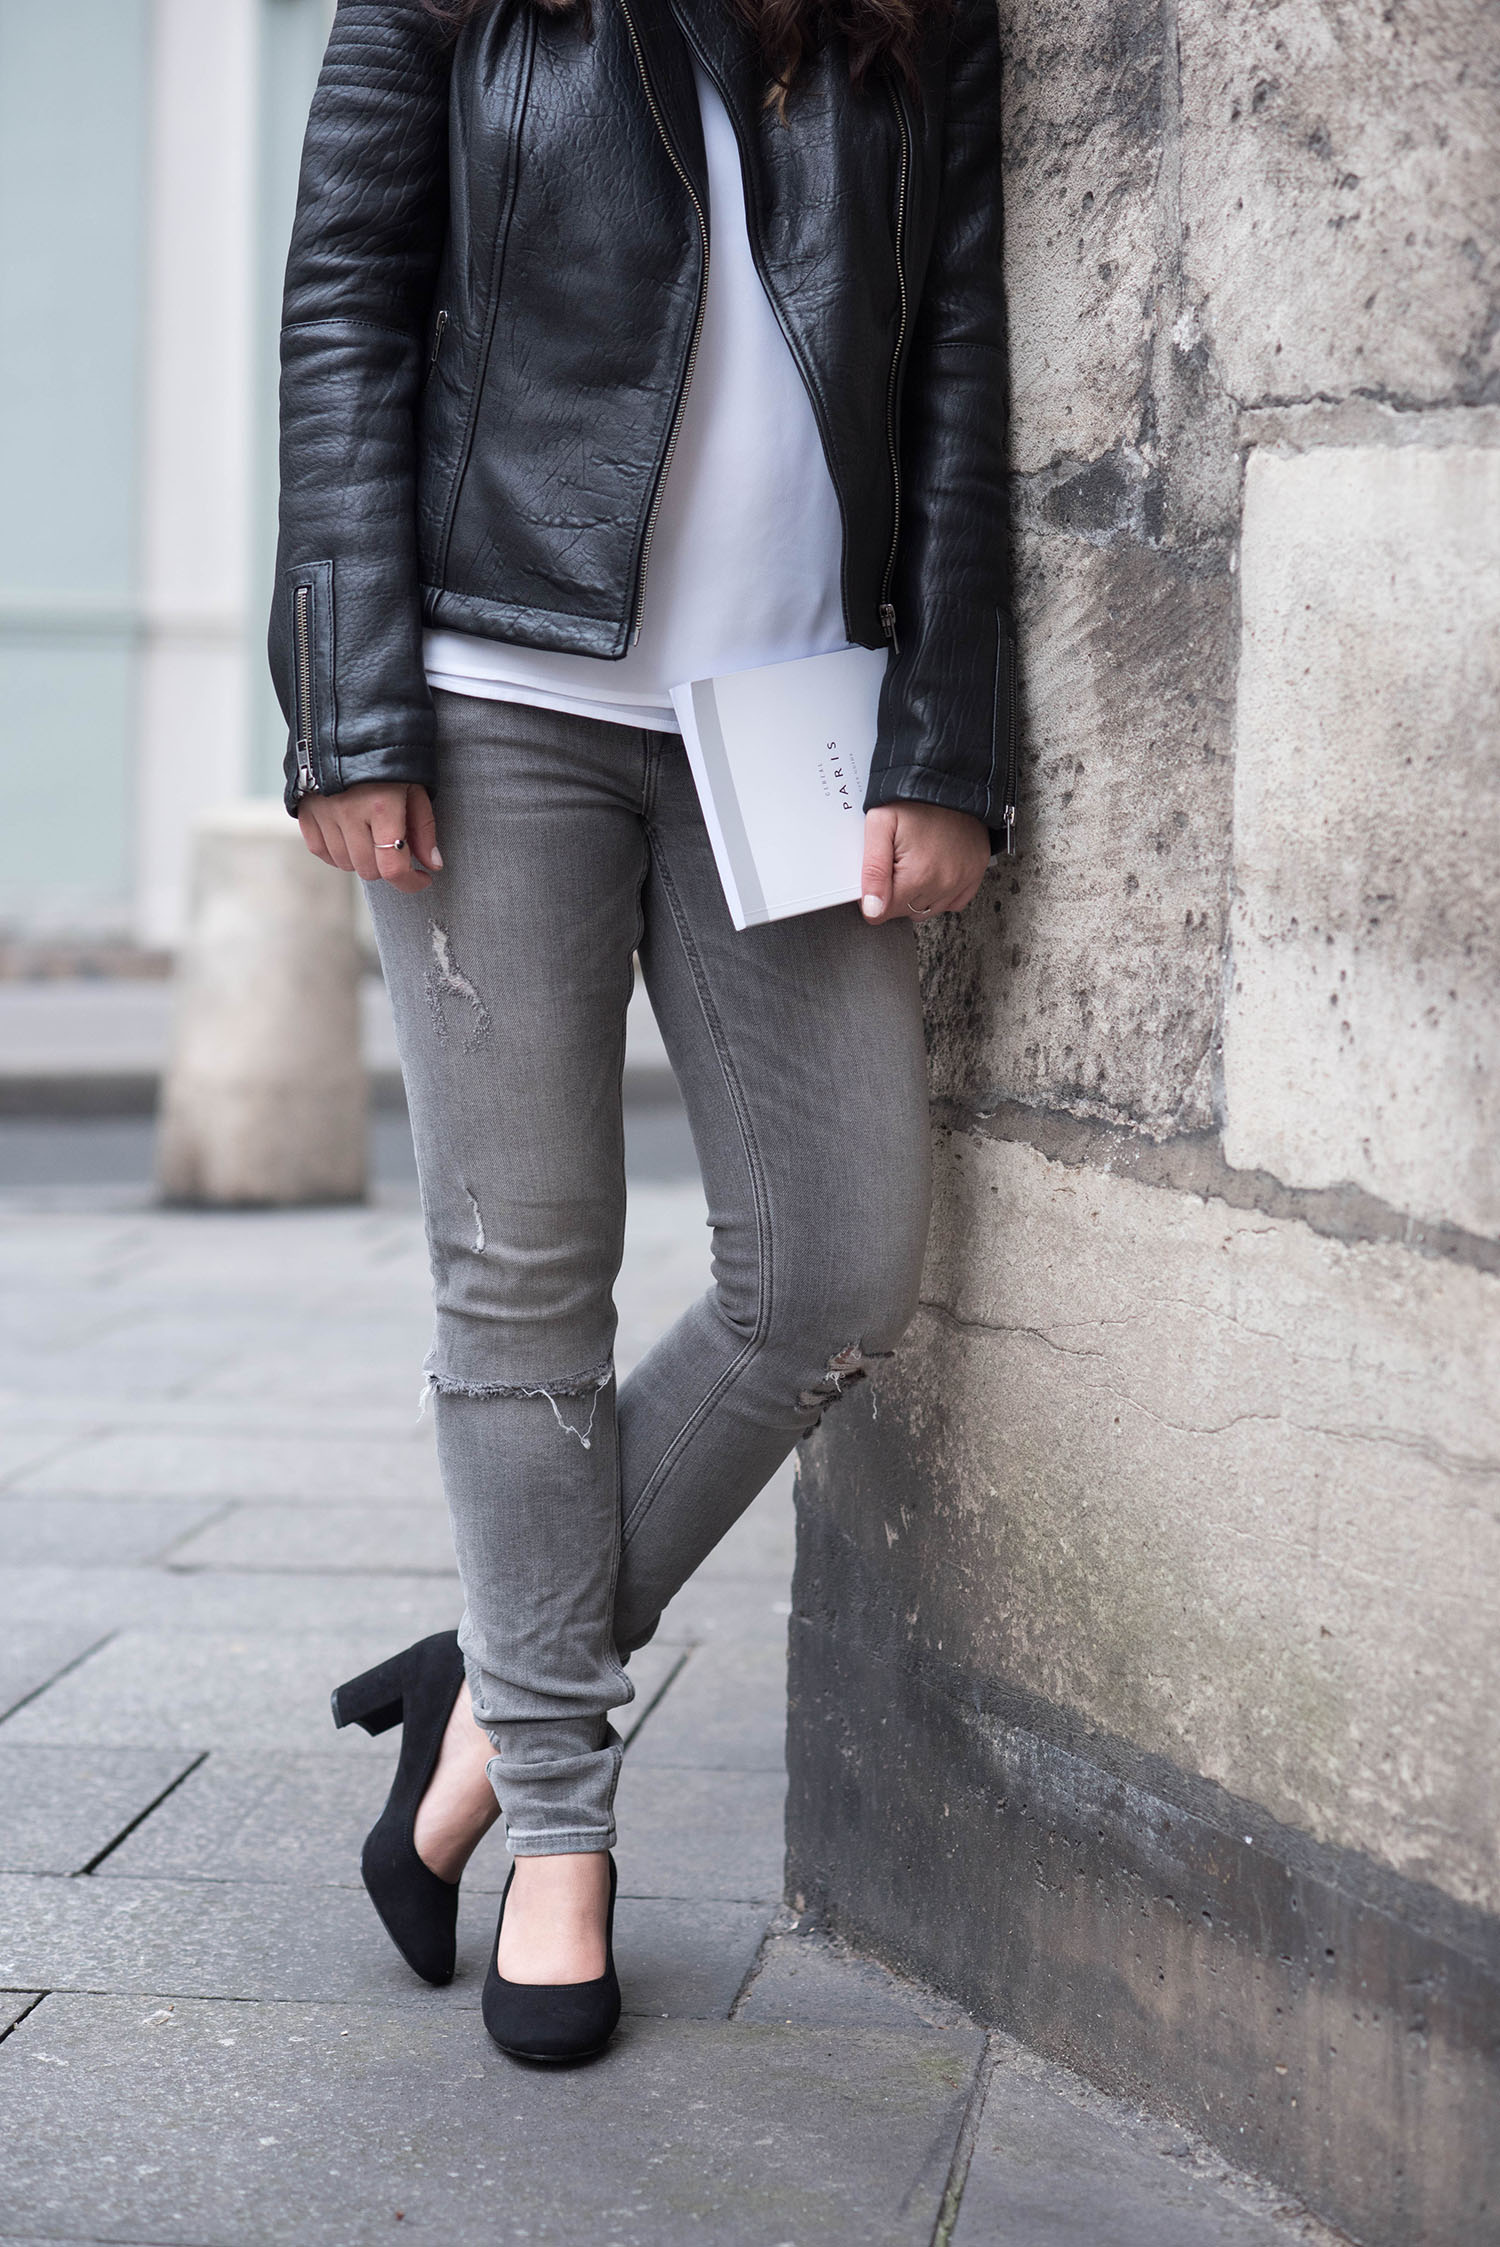 Details on lifestyle blogger Cee Fardoe of Coco & Vera, including H&M block heels and grey Zara jeans